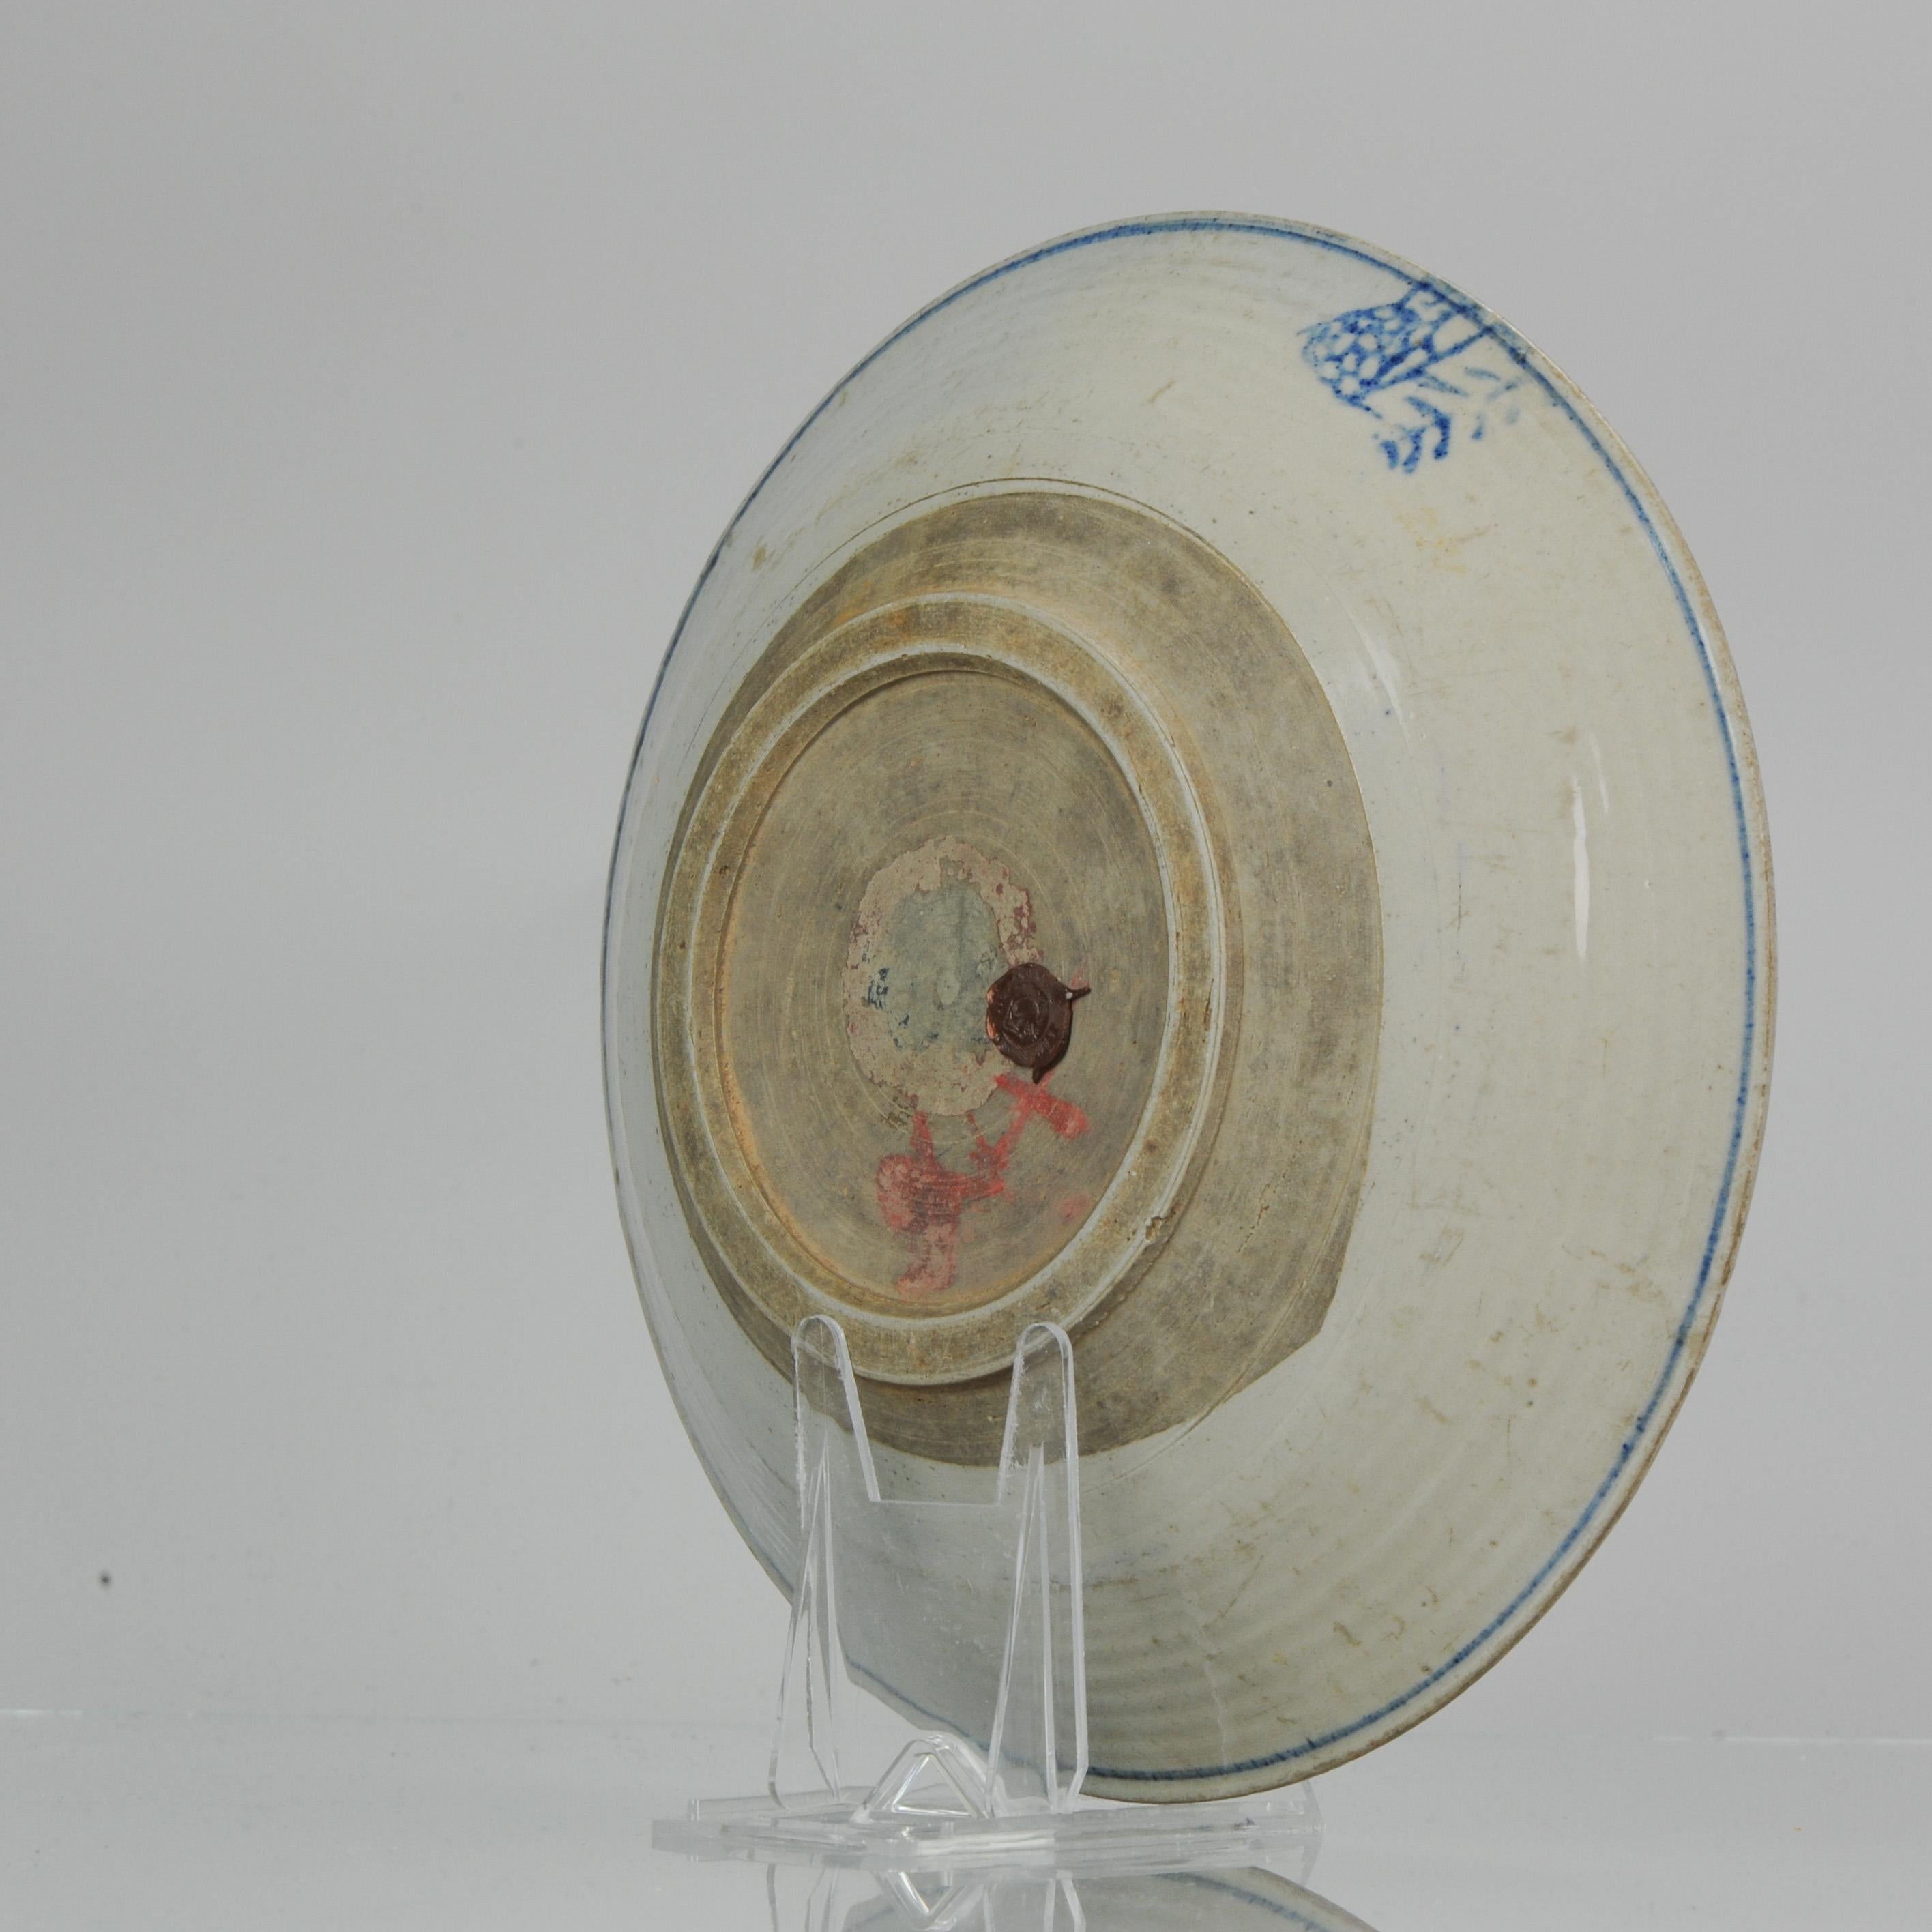 Lovely Chinese porcelain kitchen ch'ing plate. Nice seal at the back and a carved cross in the centre.

Additional information:
Material: Porcelain
Type: Tea Drinking, Teapots
Region of Origin: China
Period: 19th century Qing (1661 -